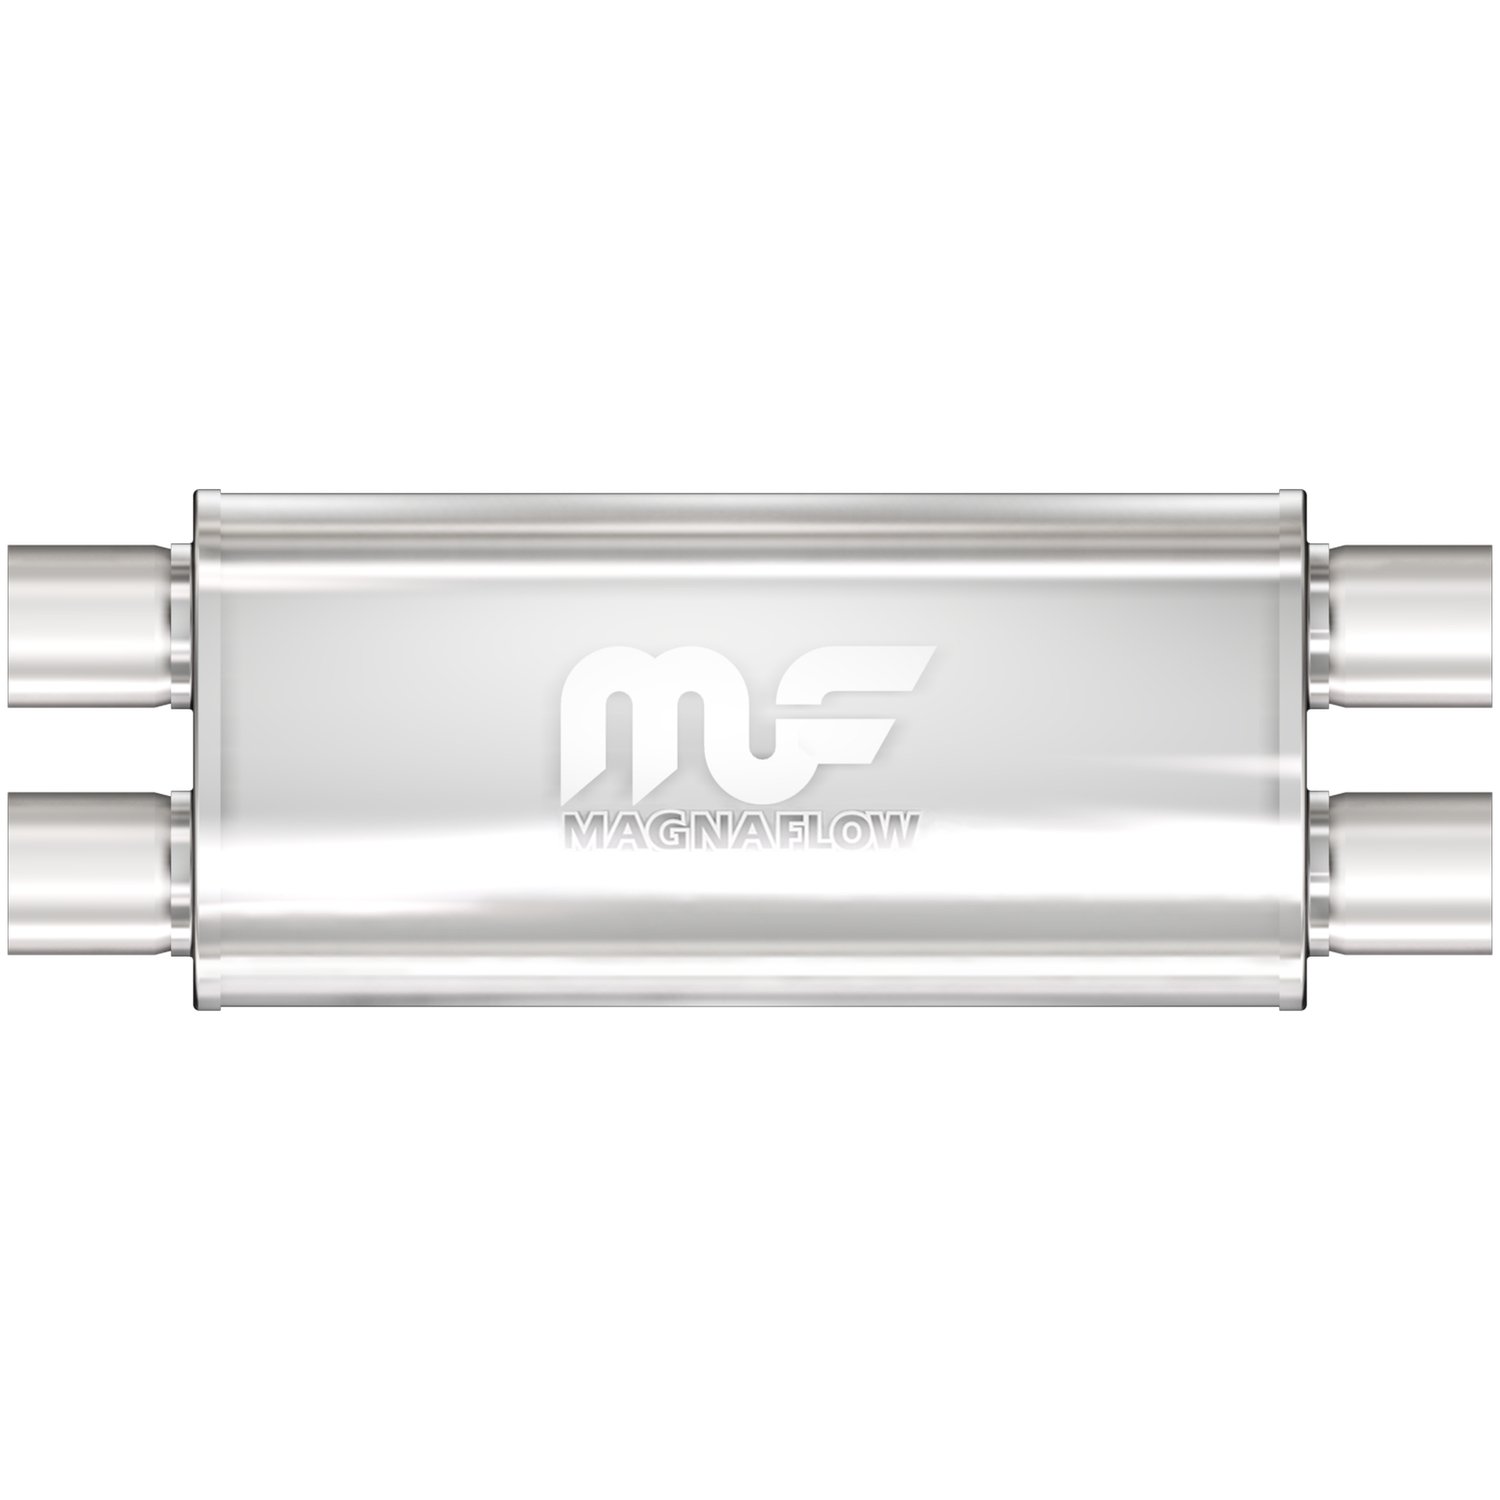 5" x 8" Oval Muffler Dual In/Dual Out: 3" Body Length: 18" Overall Length: 24" Core Size: 3" Satin Finish